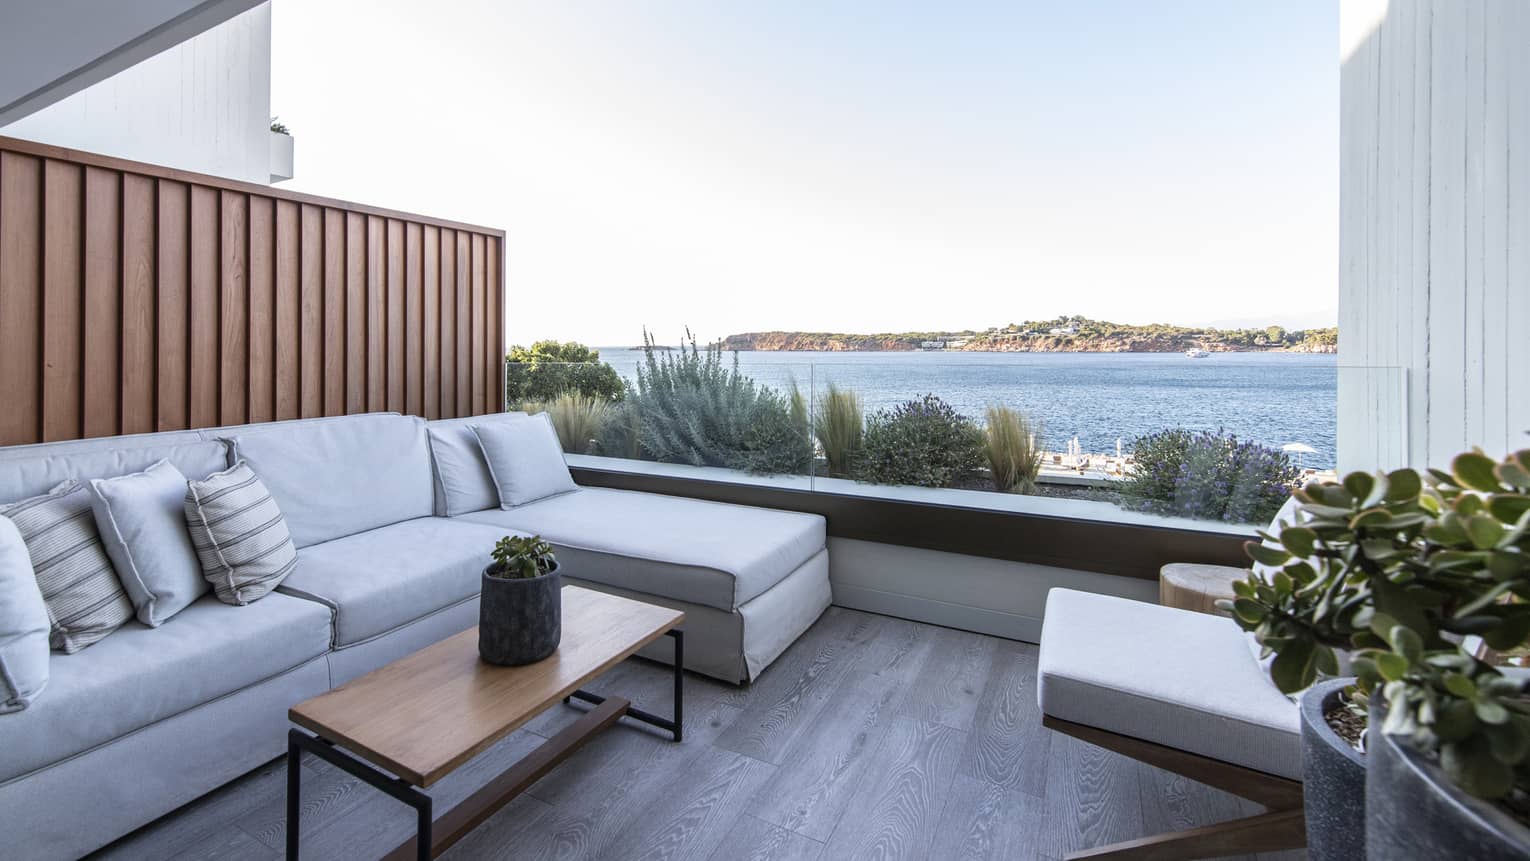 Small terrace with sectional sofa, coffee table sea view